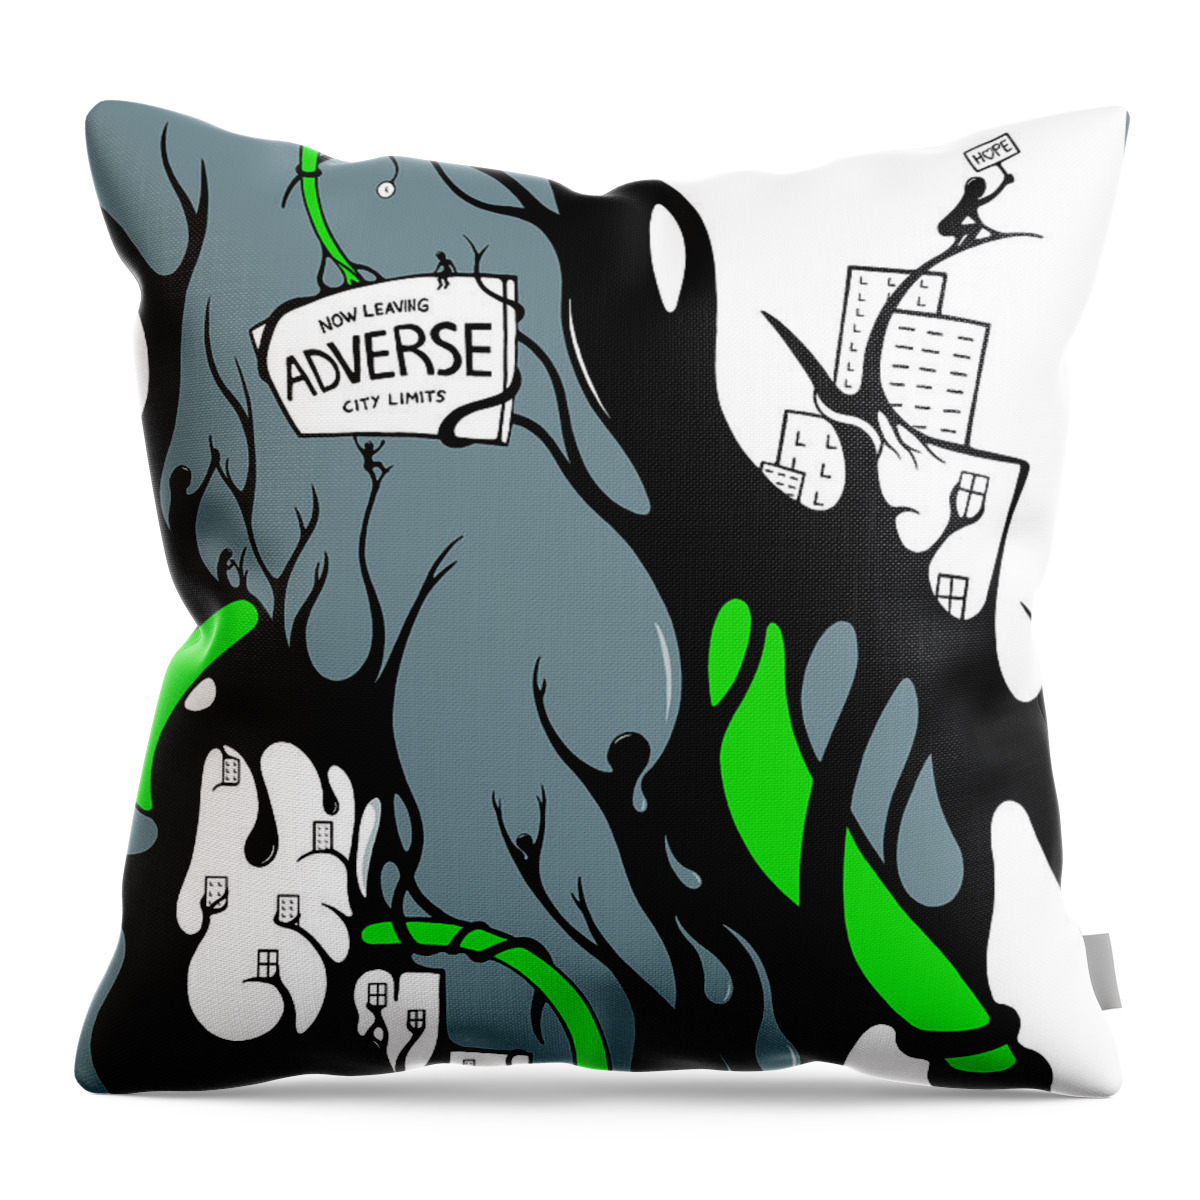 Hope Throw Pillow featuring the digital art Leaving Adversity by Craig Tilley